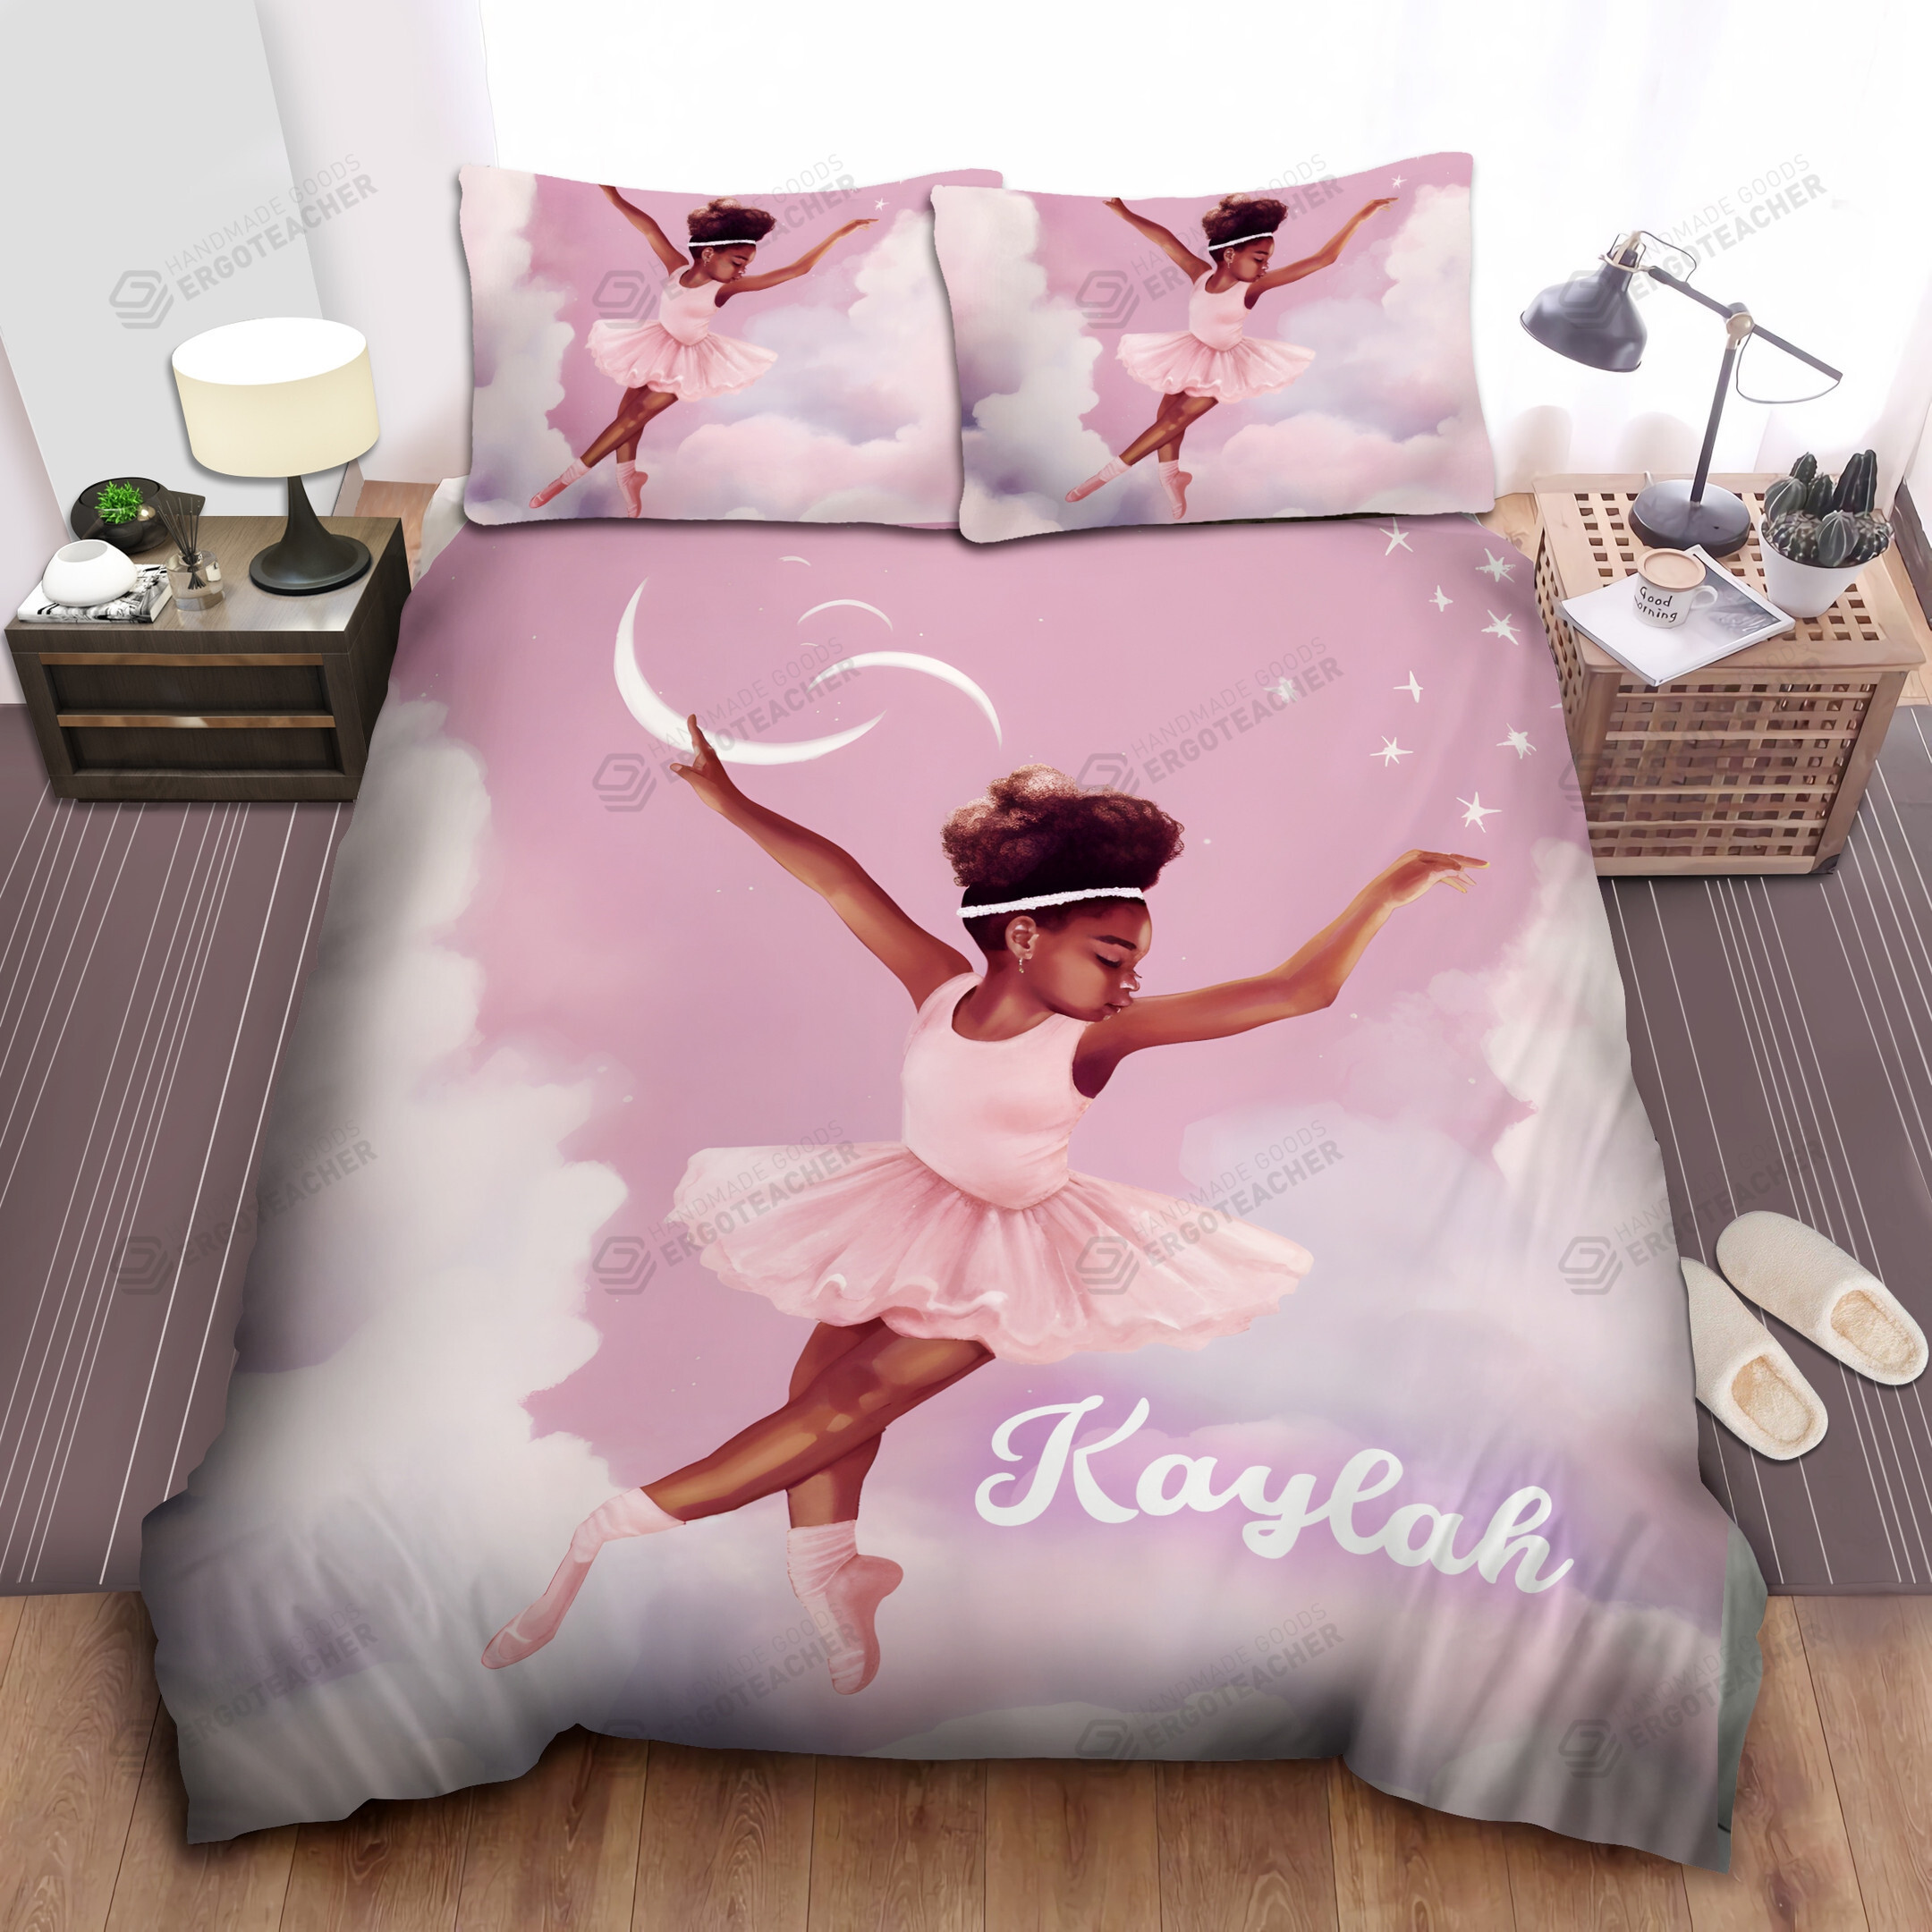 Personalized African American Black Baby Girl Magic Duvet Cover Bedding Set